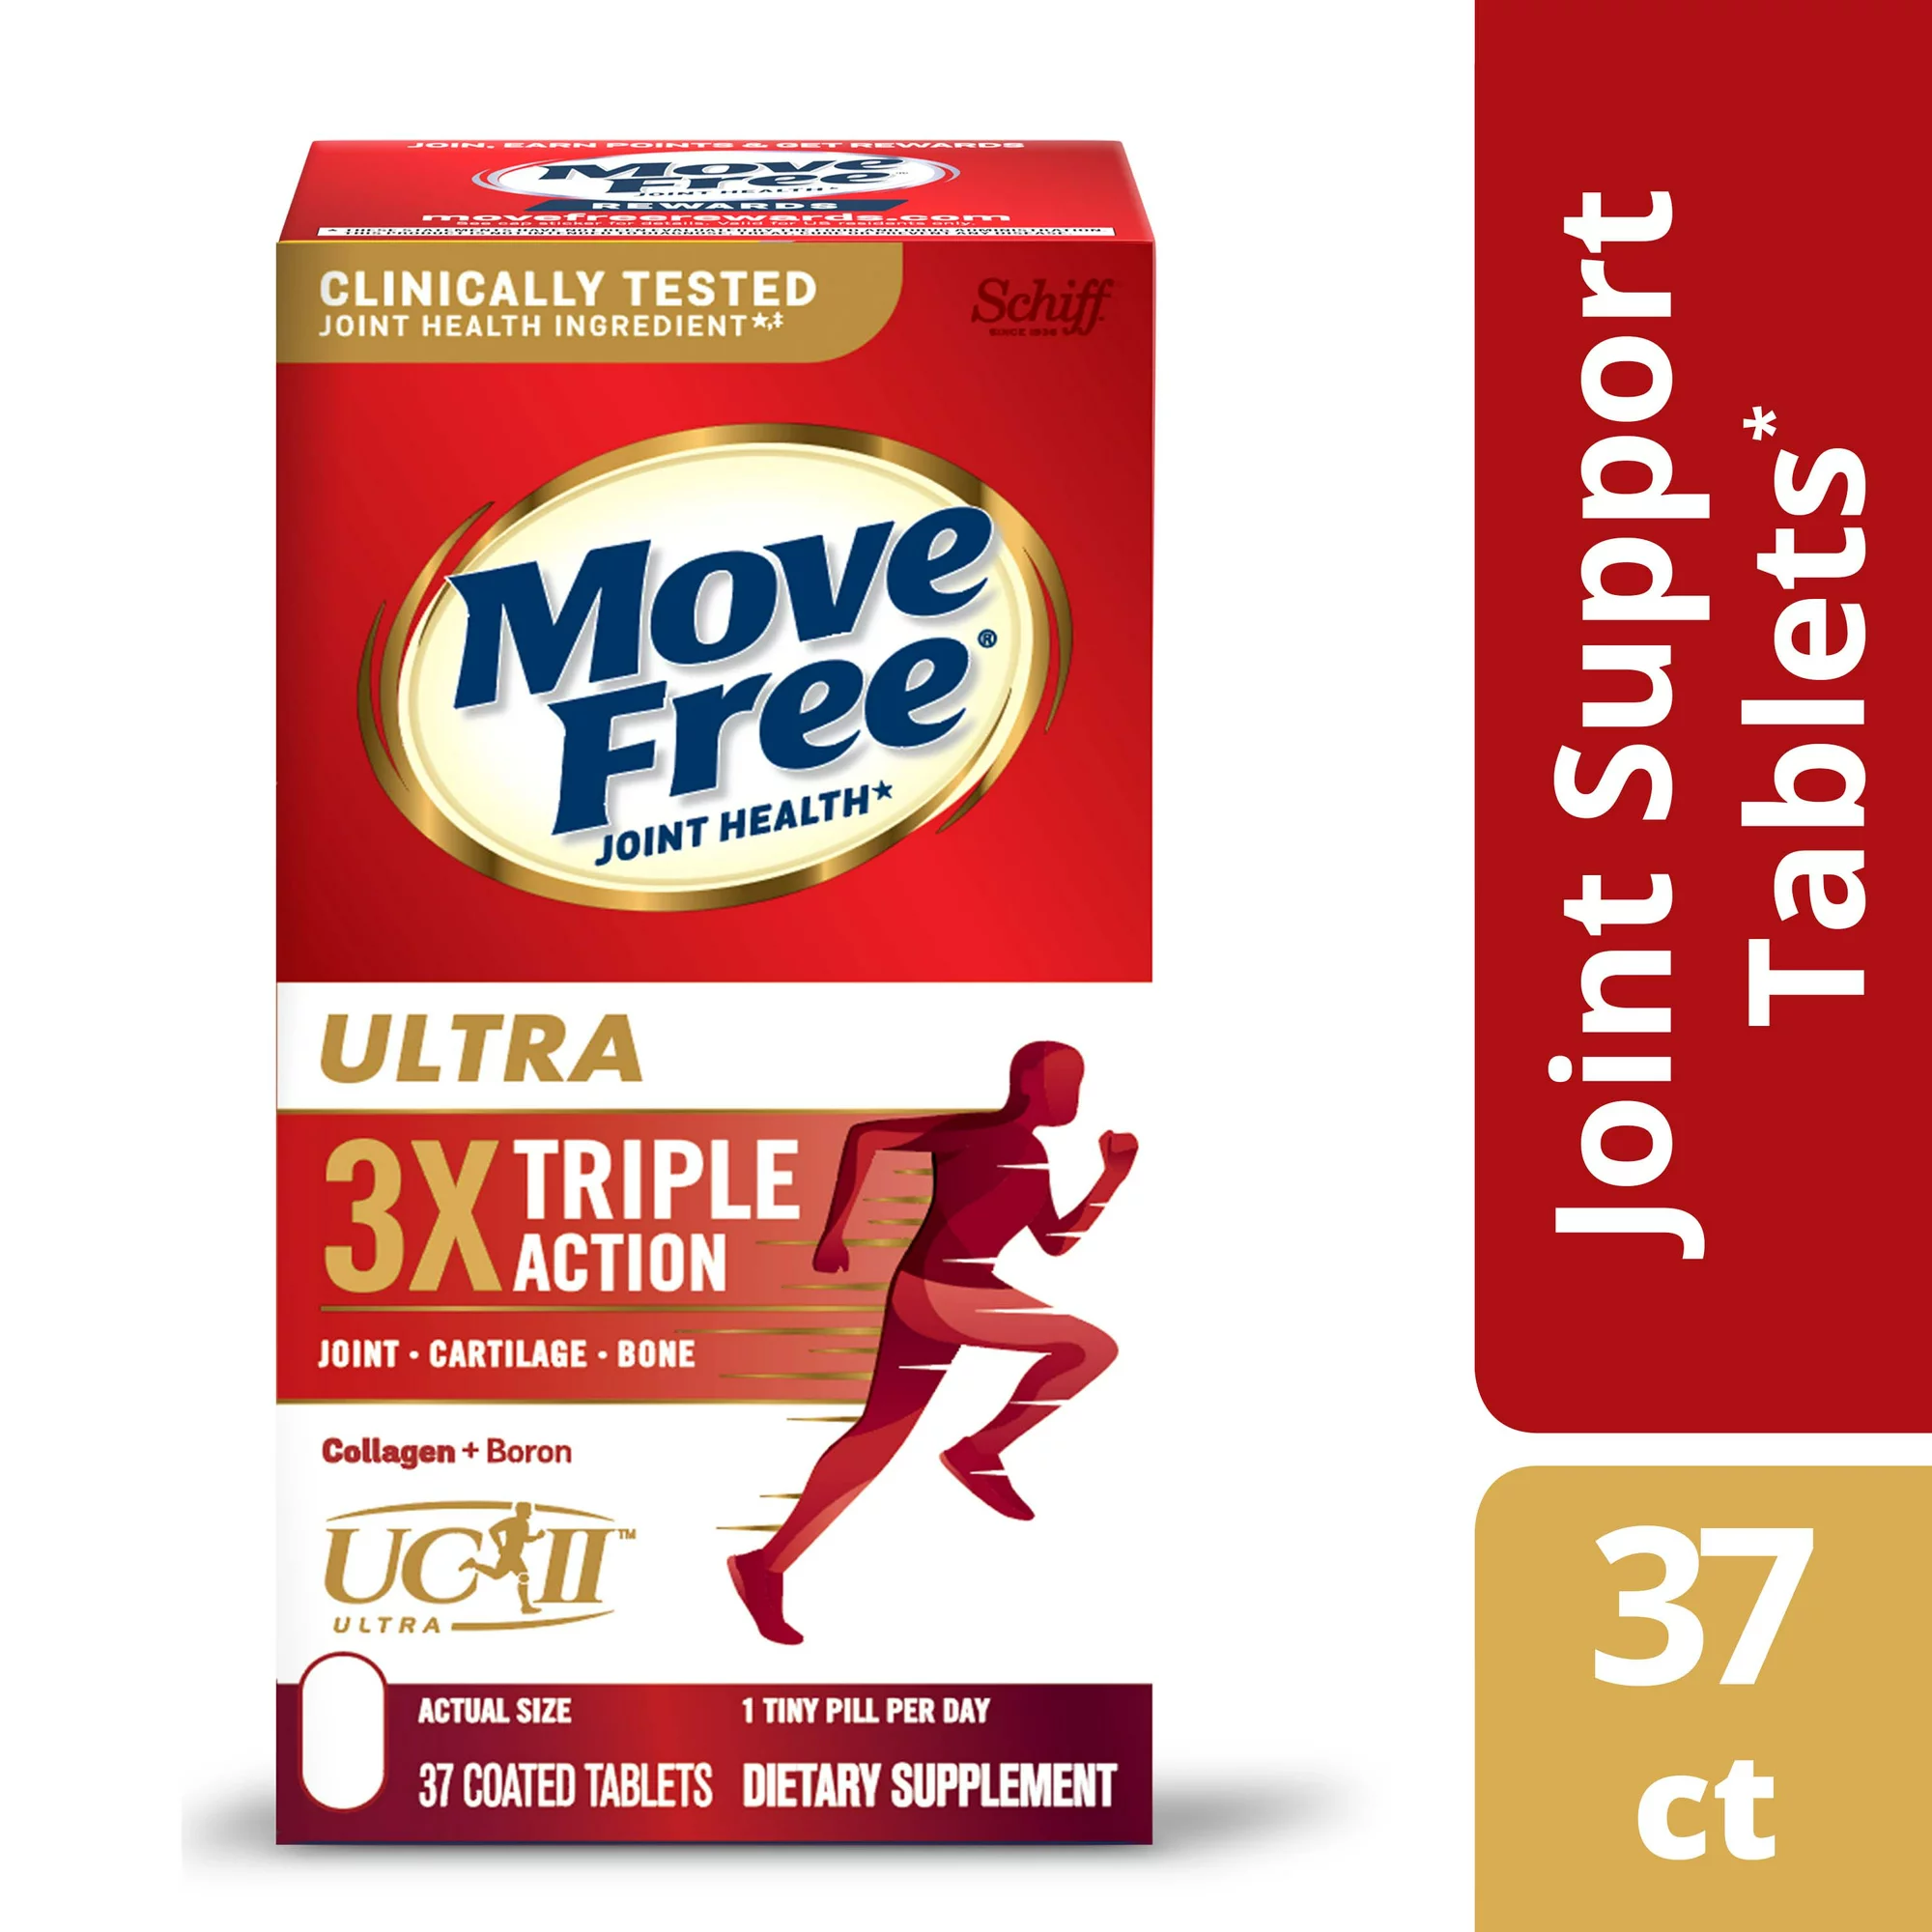 Free yourself from joint discomfort using MOVE FREE Products!